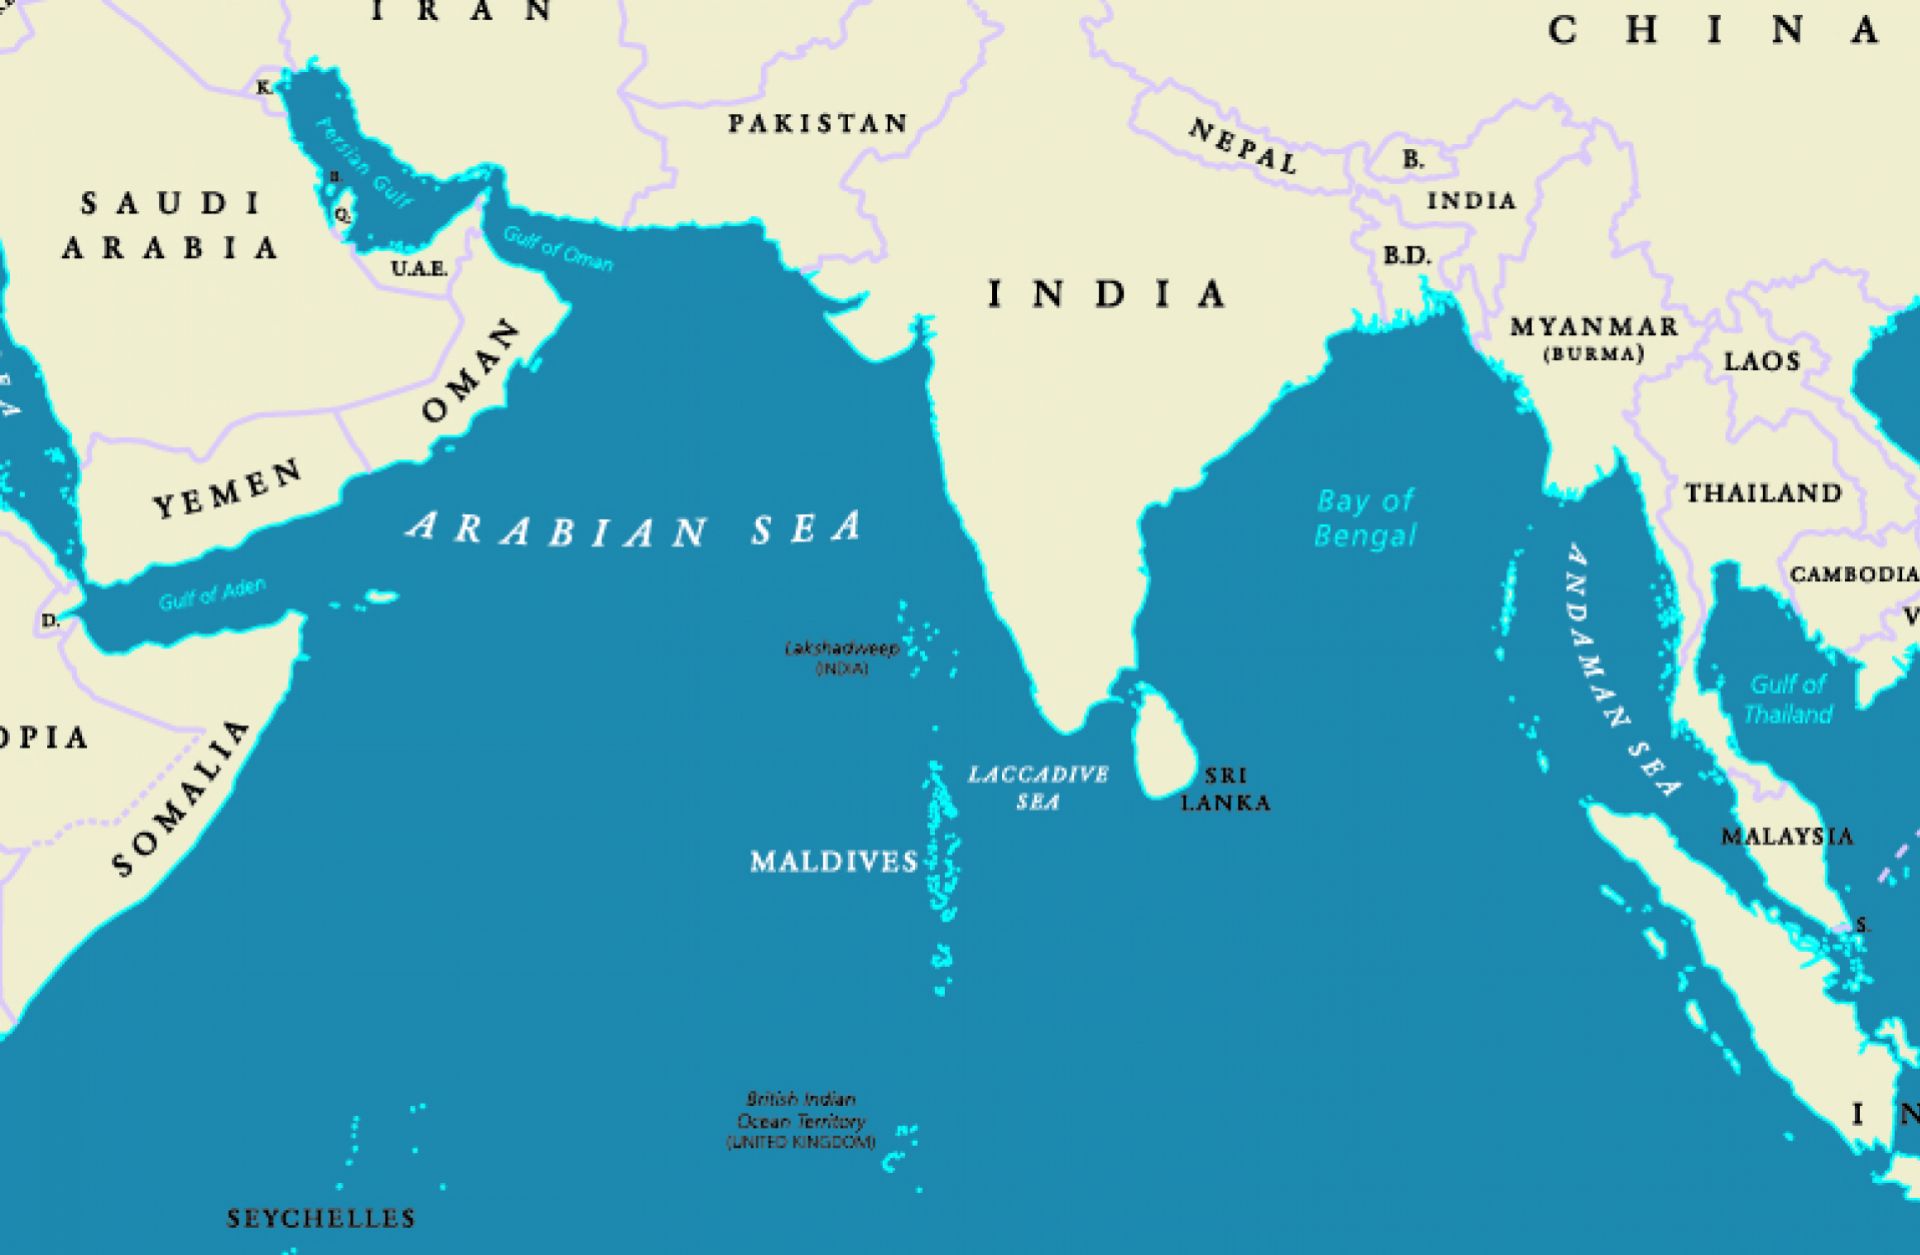 The Maldives is an Indian Ocean archipelago with a population of about 400,000.